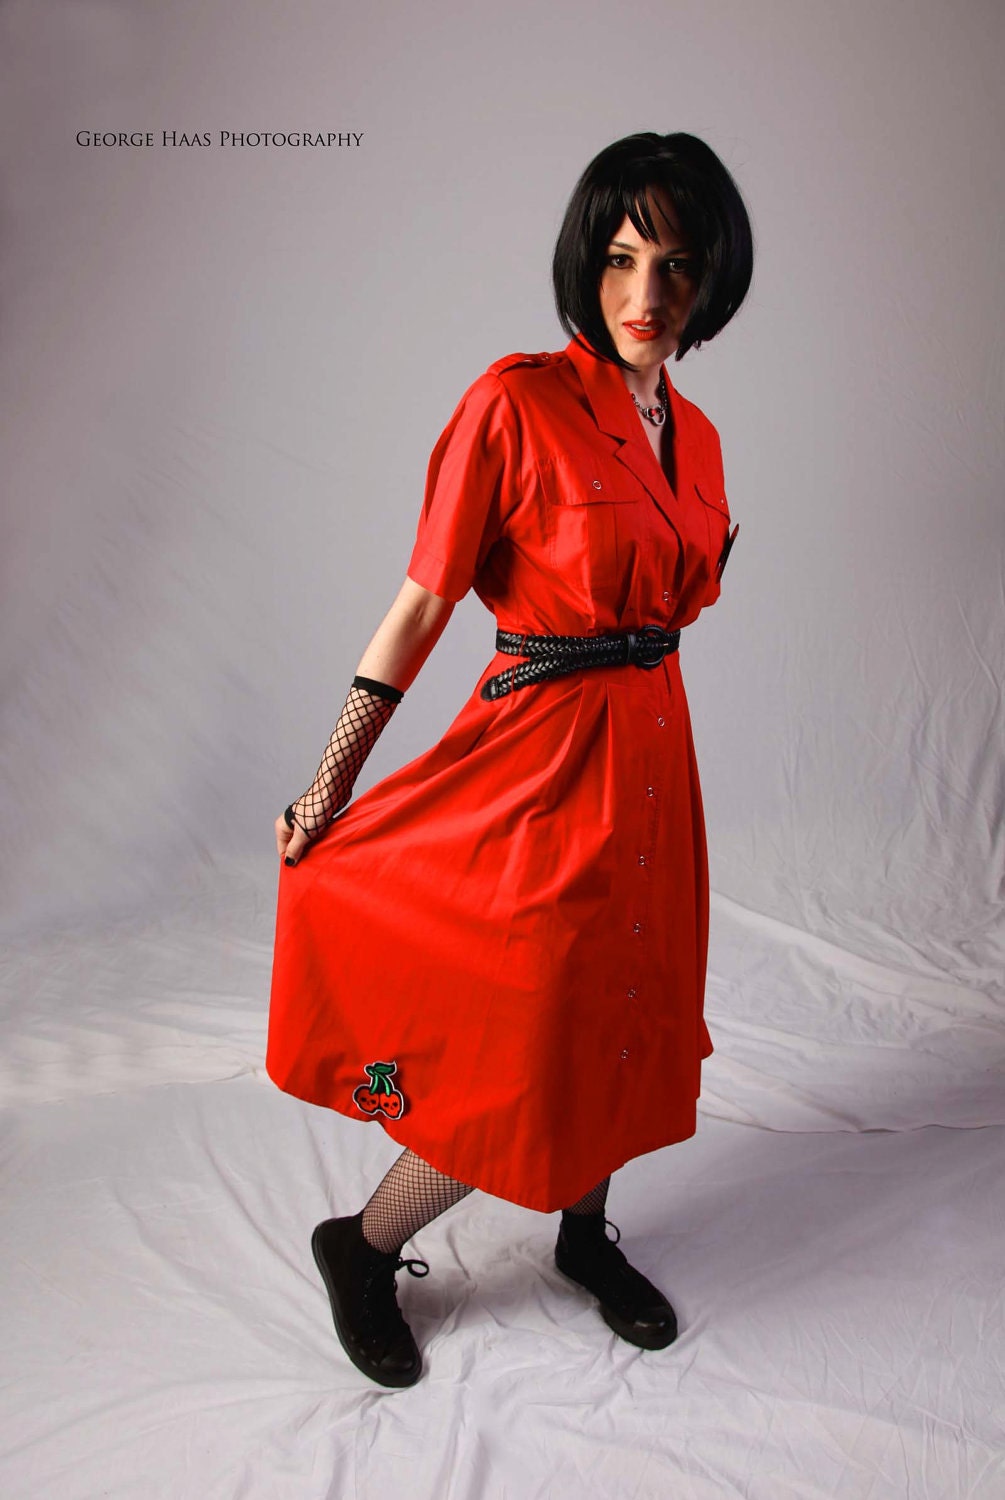 vintage 1980s rockabilly punk red button up dress with shoulder tabs, skull patch, cherry skull patch